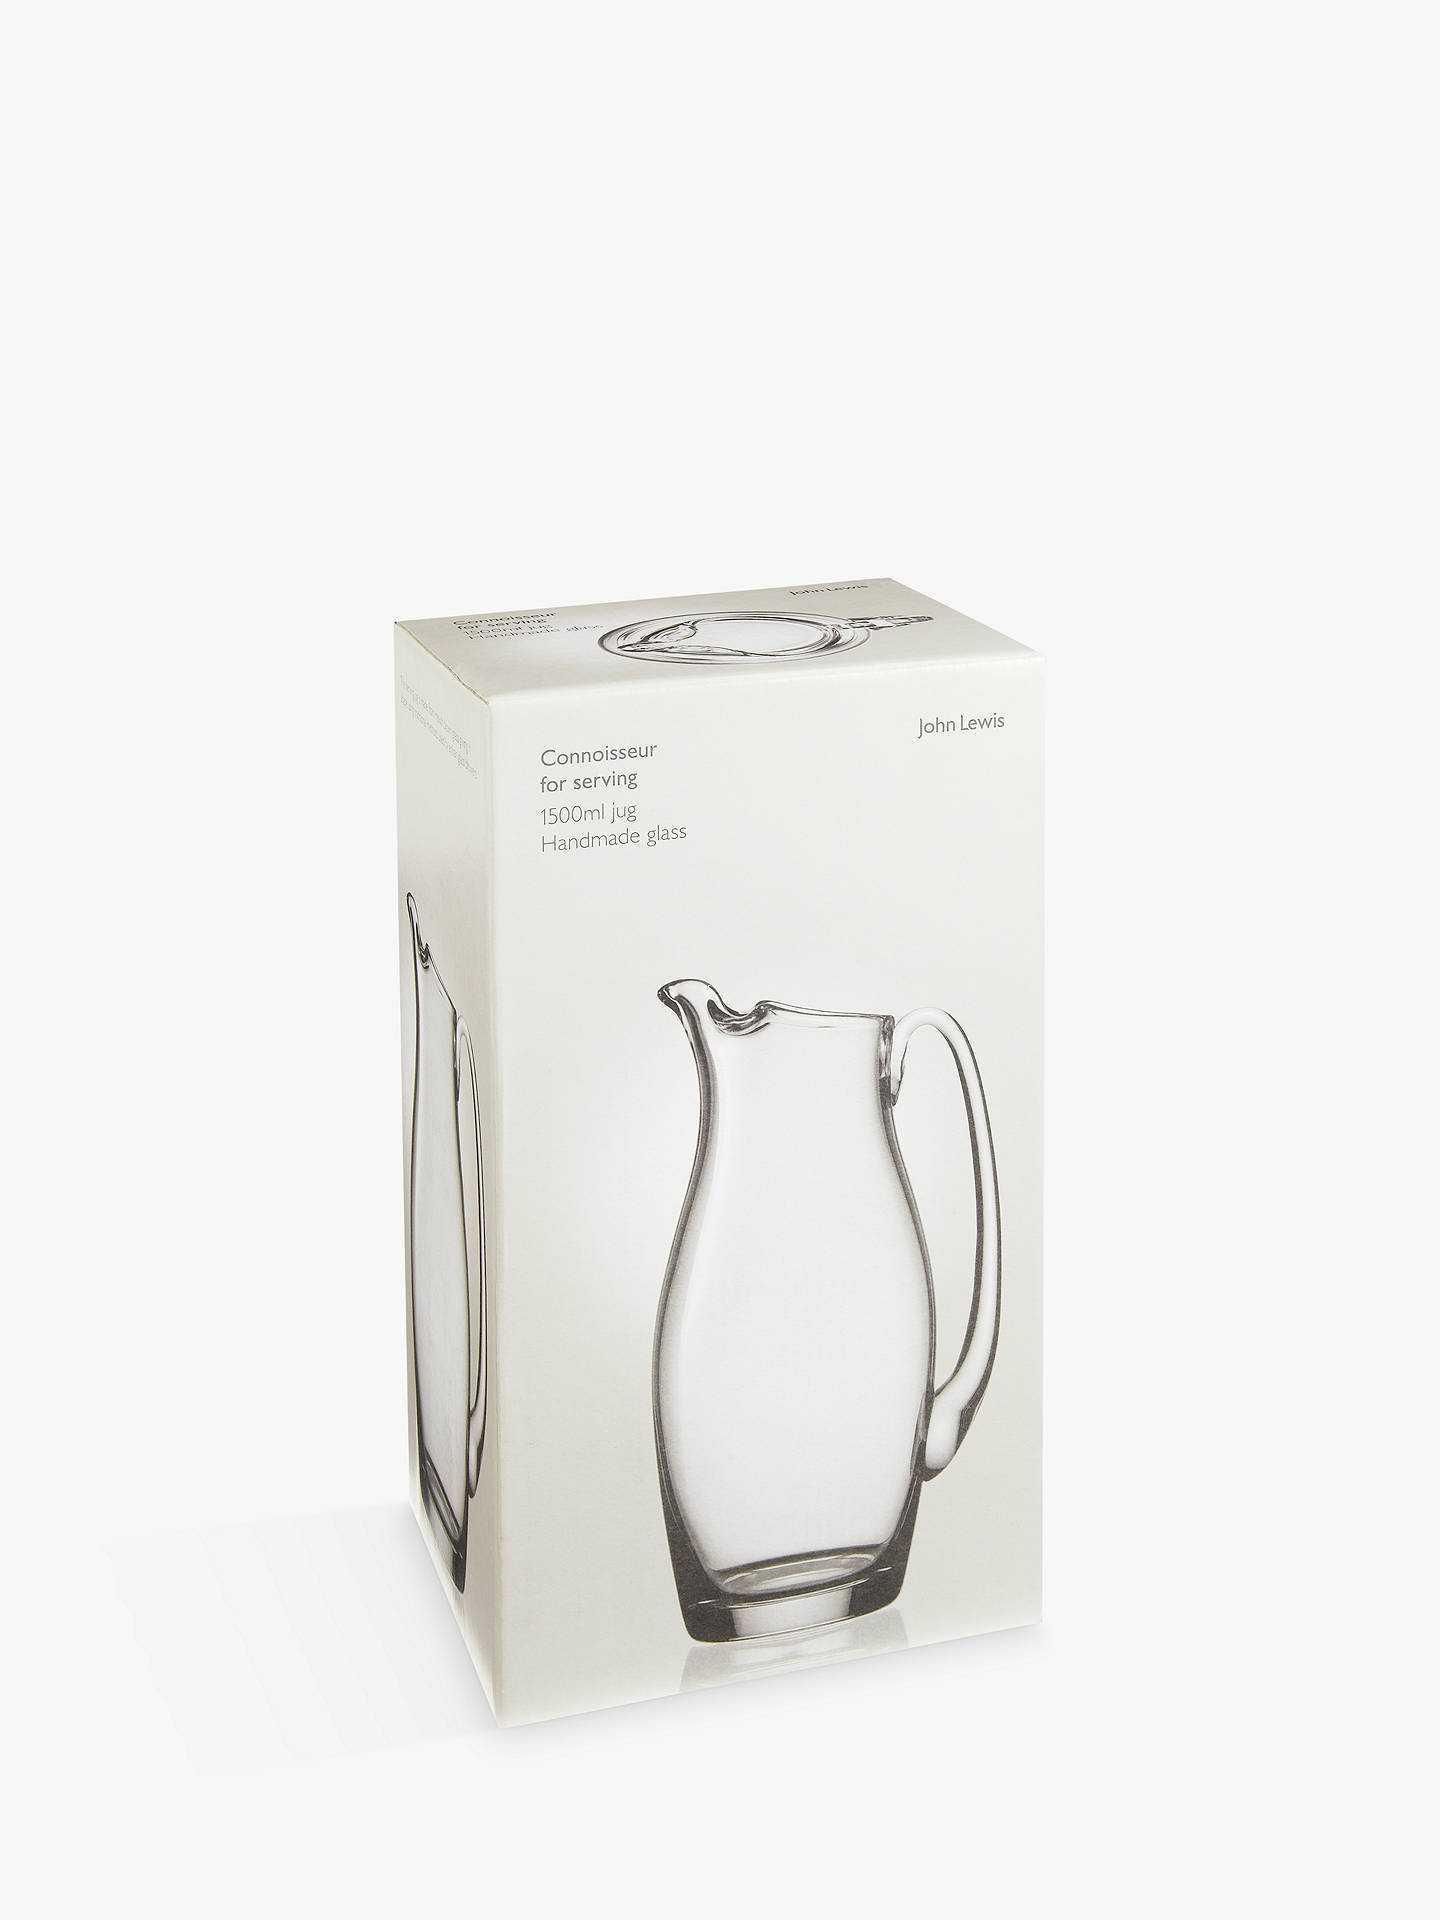 RRP £80 Lot To Contain 2 Boxed Brand New John Lewis Connoisseur 1500Ml Handmade Glass Jugs - Image 3 of 3